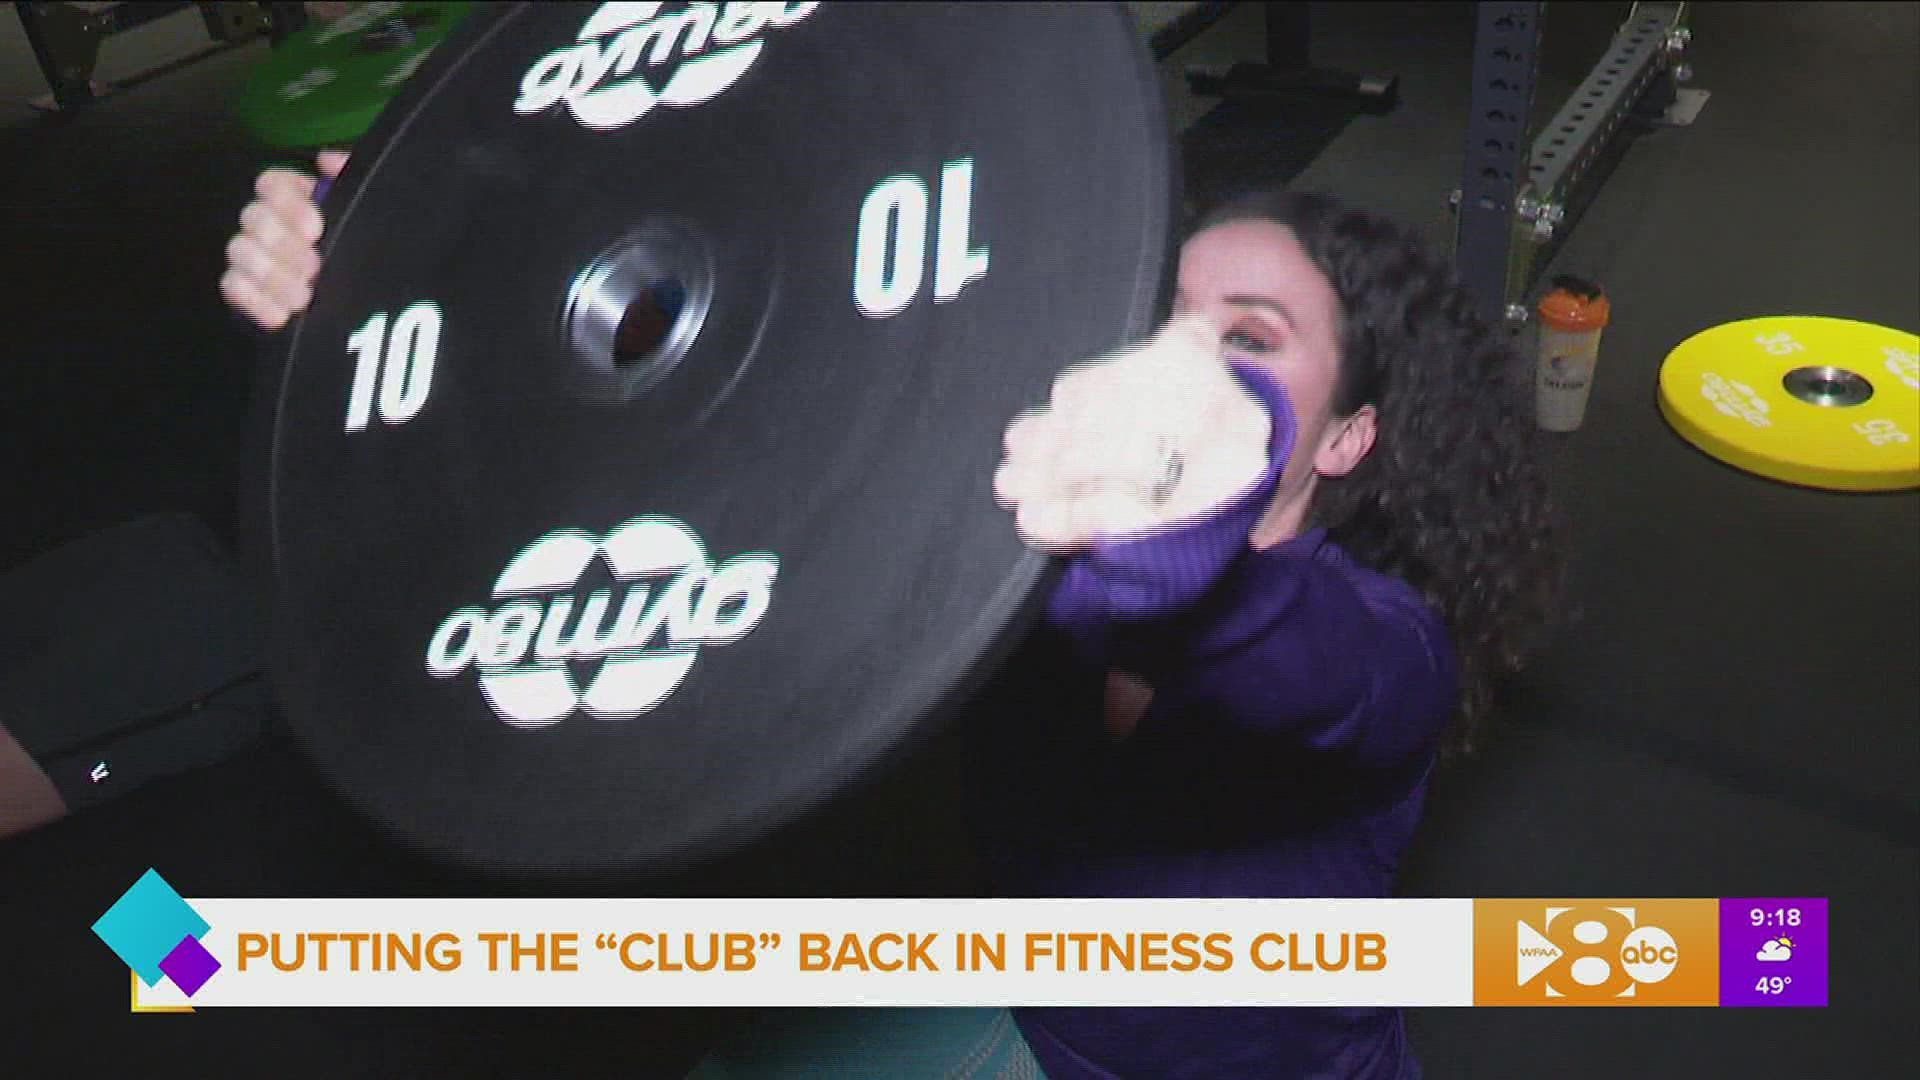 A new gym has come to town that's emphasizing the "club" part of Fitness Club and Hannah went out to check this unique concept for herself.